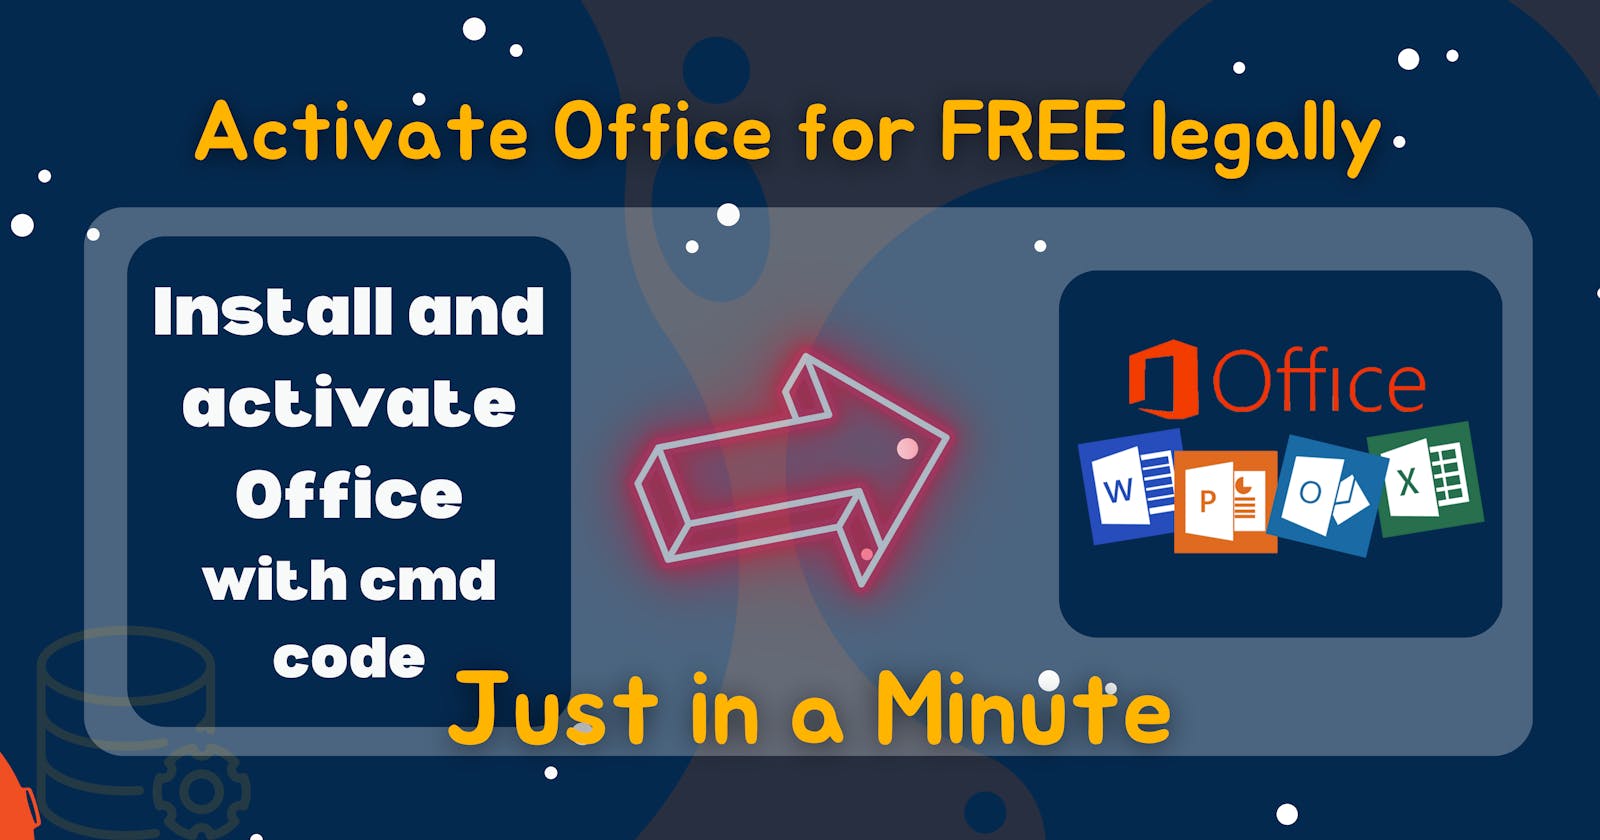 Install and activate Office for FREE legally